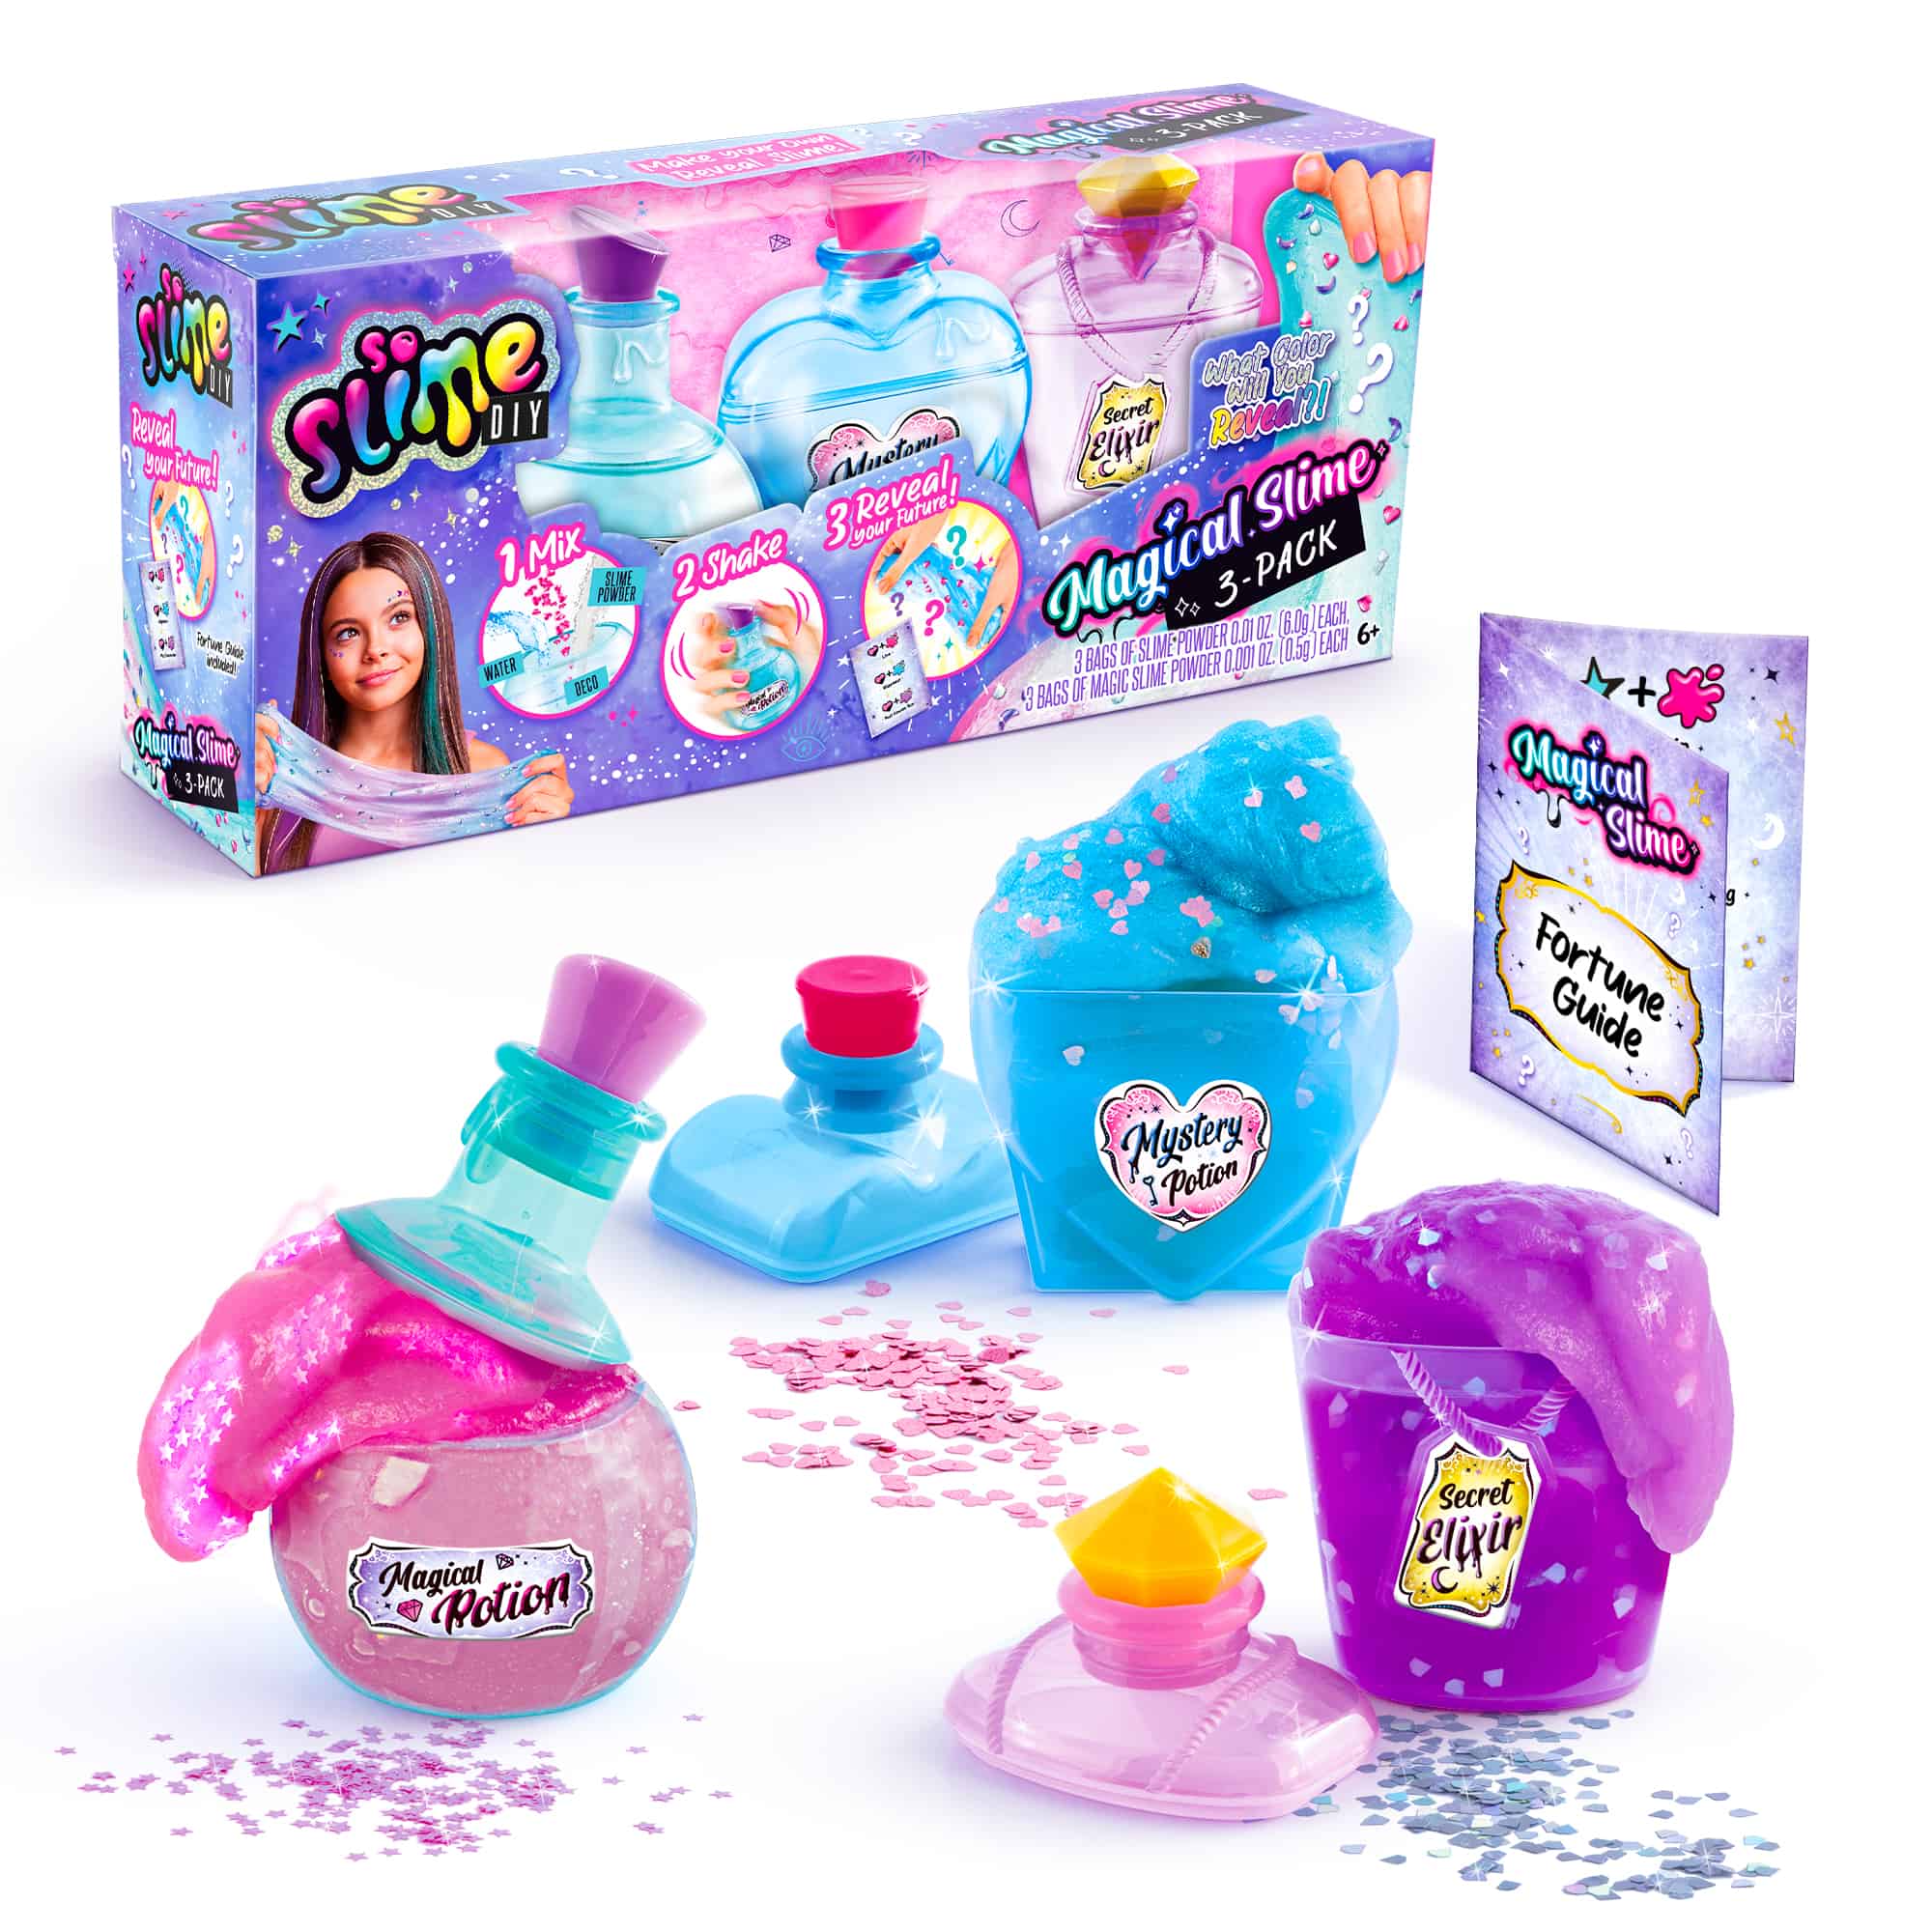  canal toys: Magical slime potion